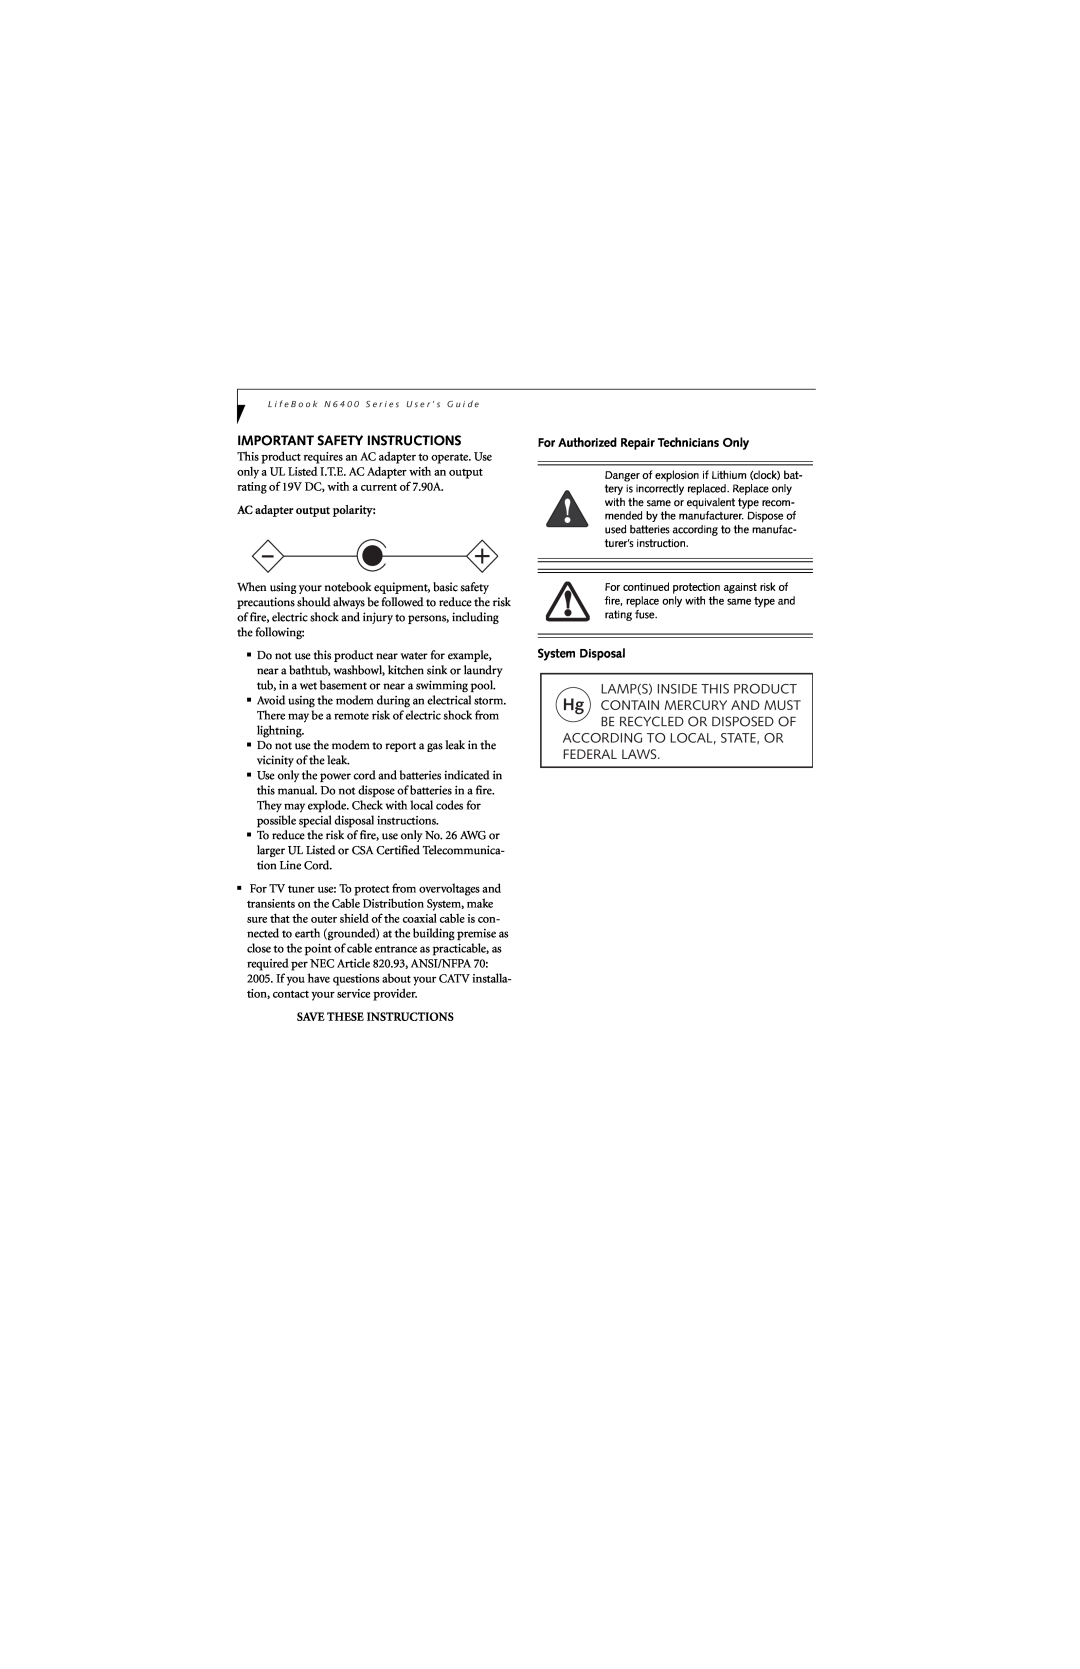 Fujitsu N6420 manual Important Safety Instructions, According To Local, State, Or Federal Laws, AC adapter output polarity 